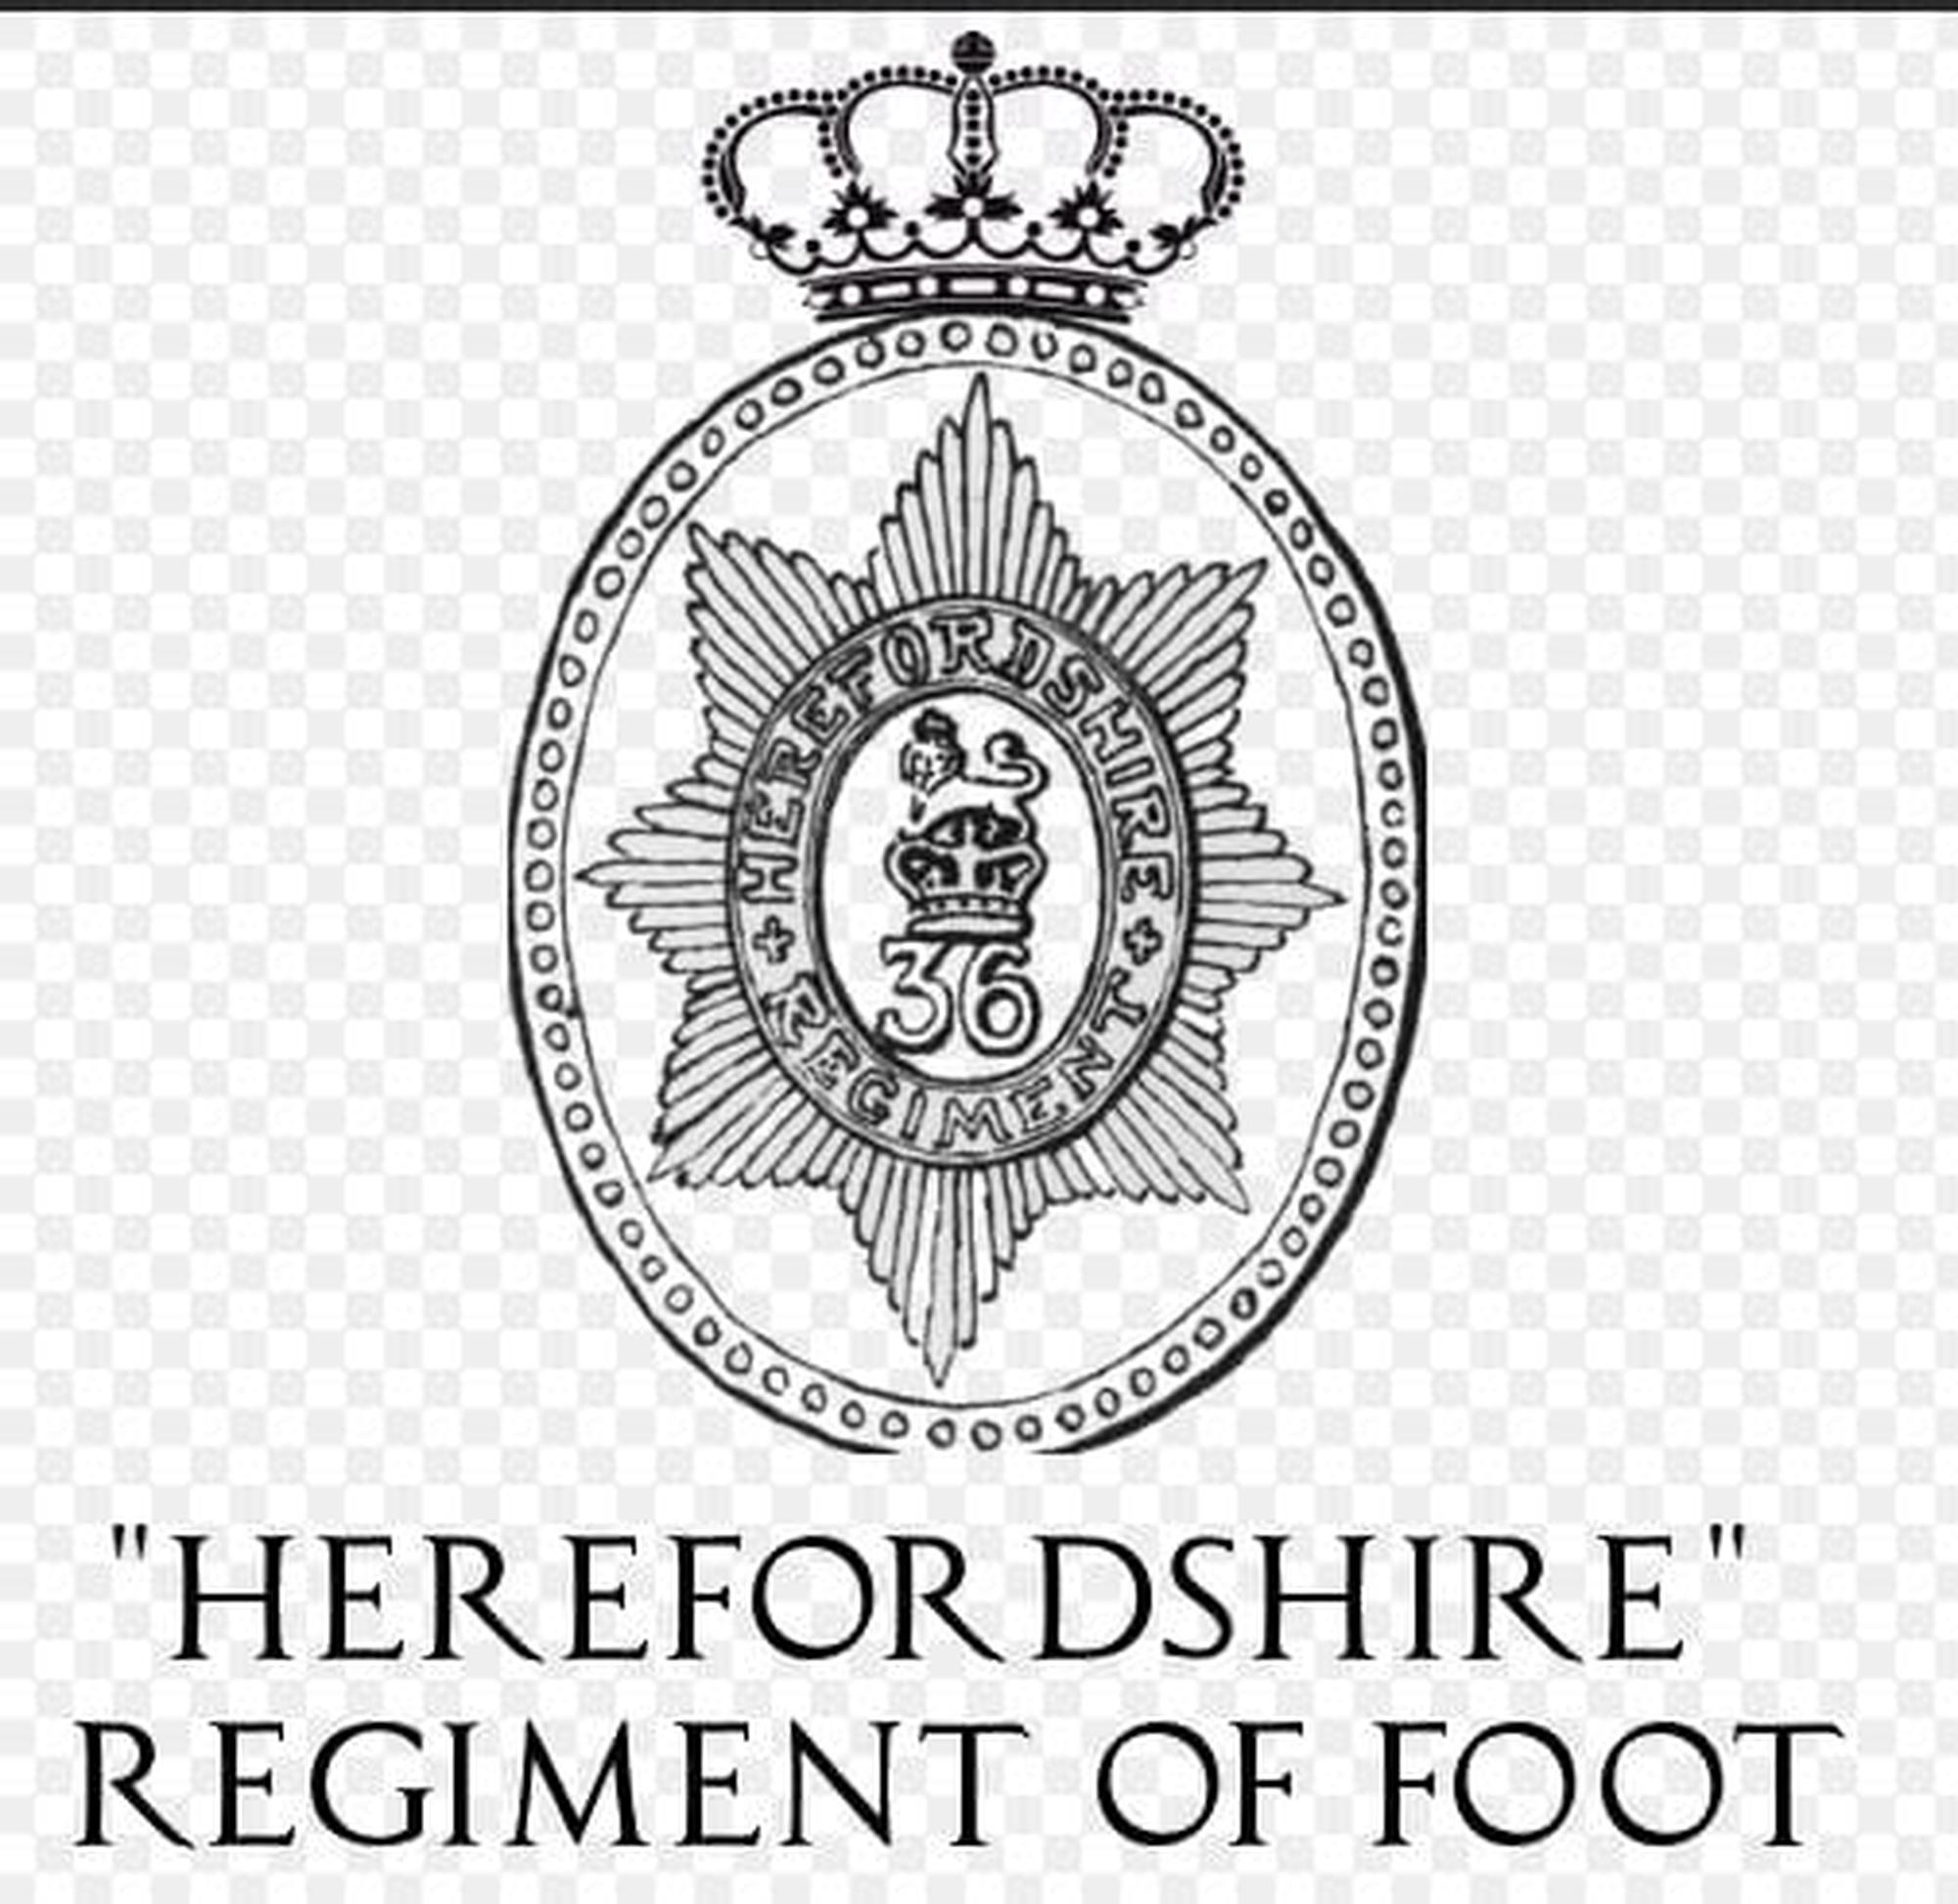 The 36th (Herefordshire) Regiment